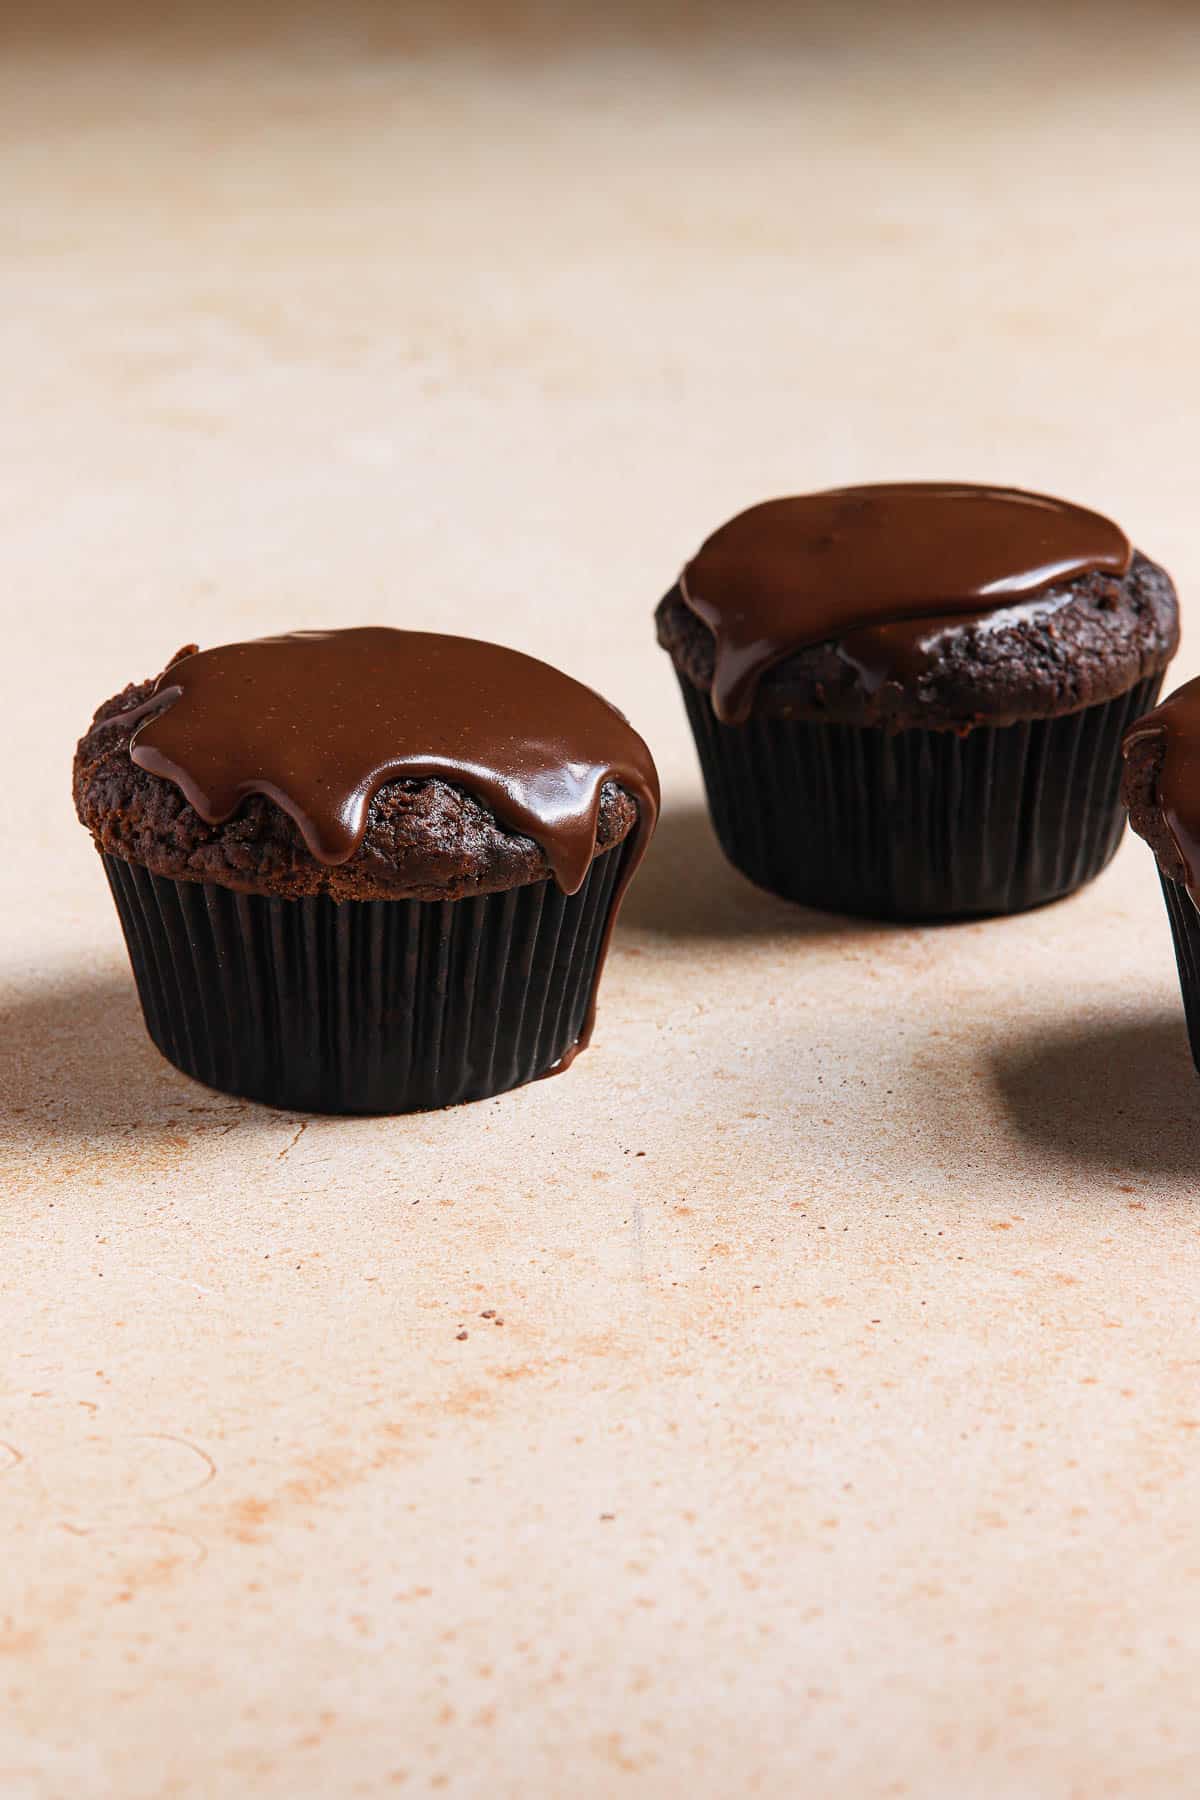 Chocolate cupcakes frosted with chocolate icing.